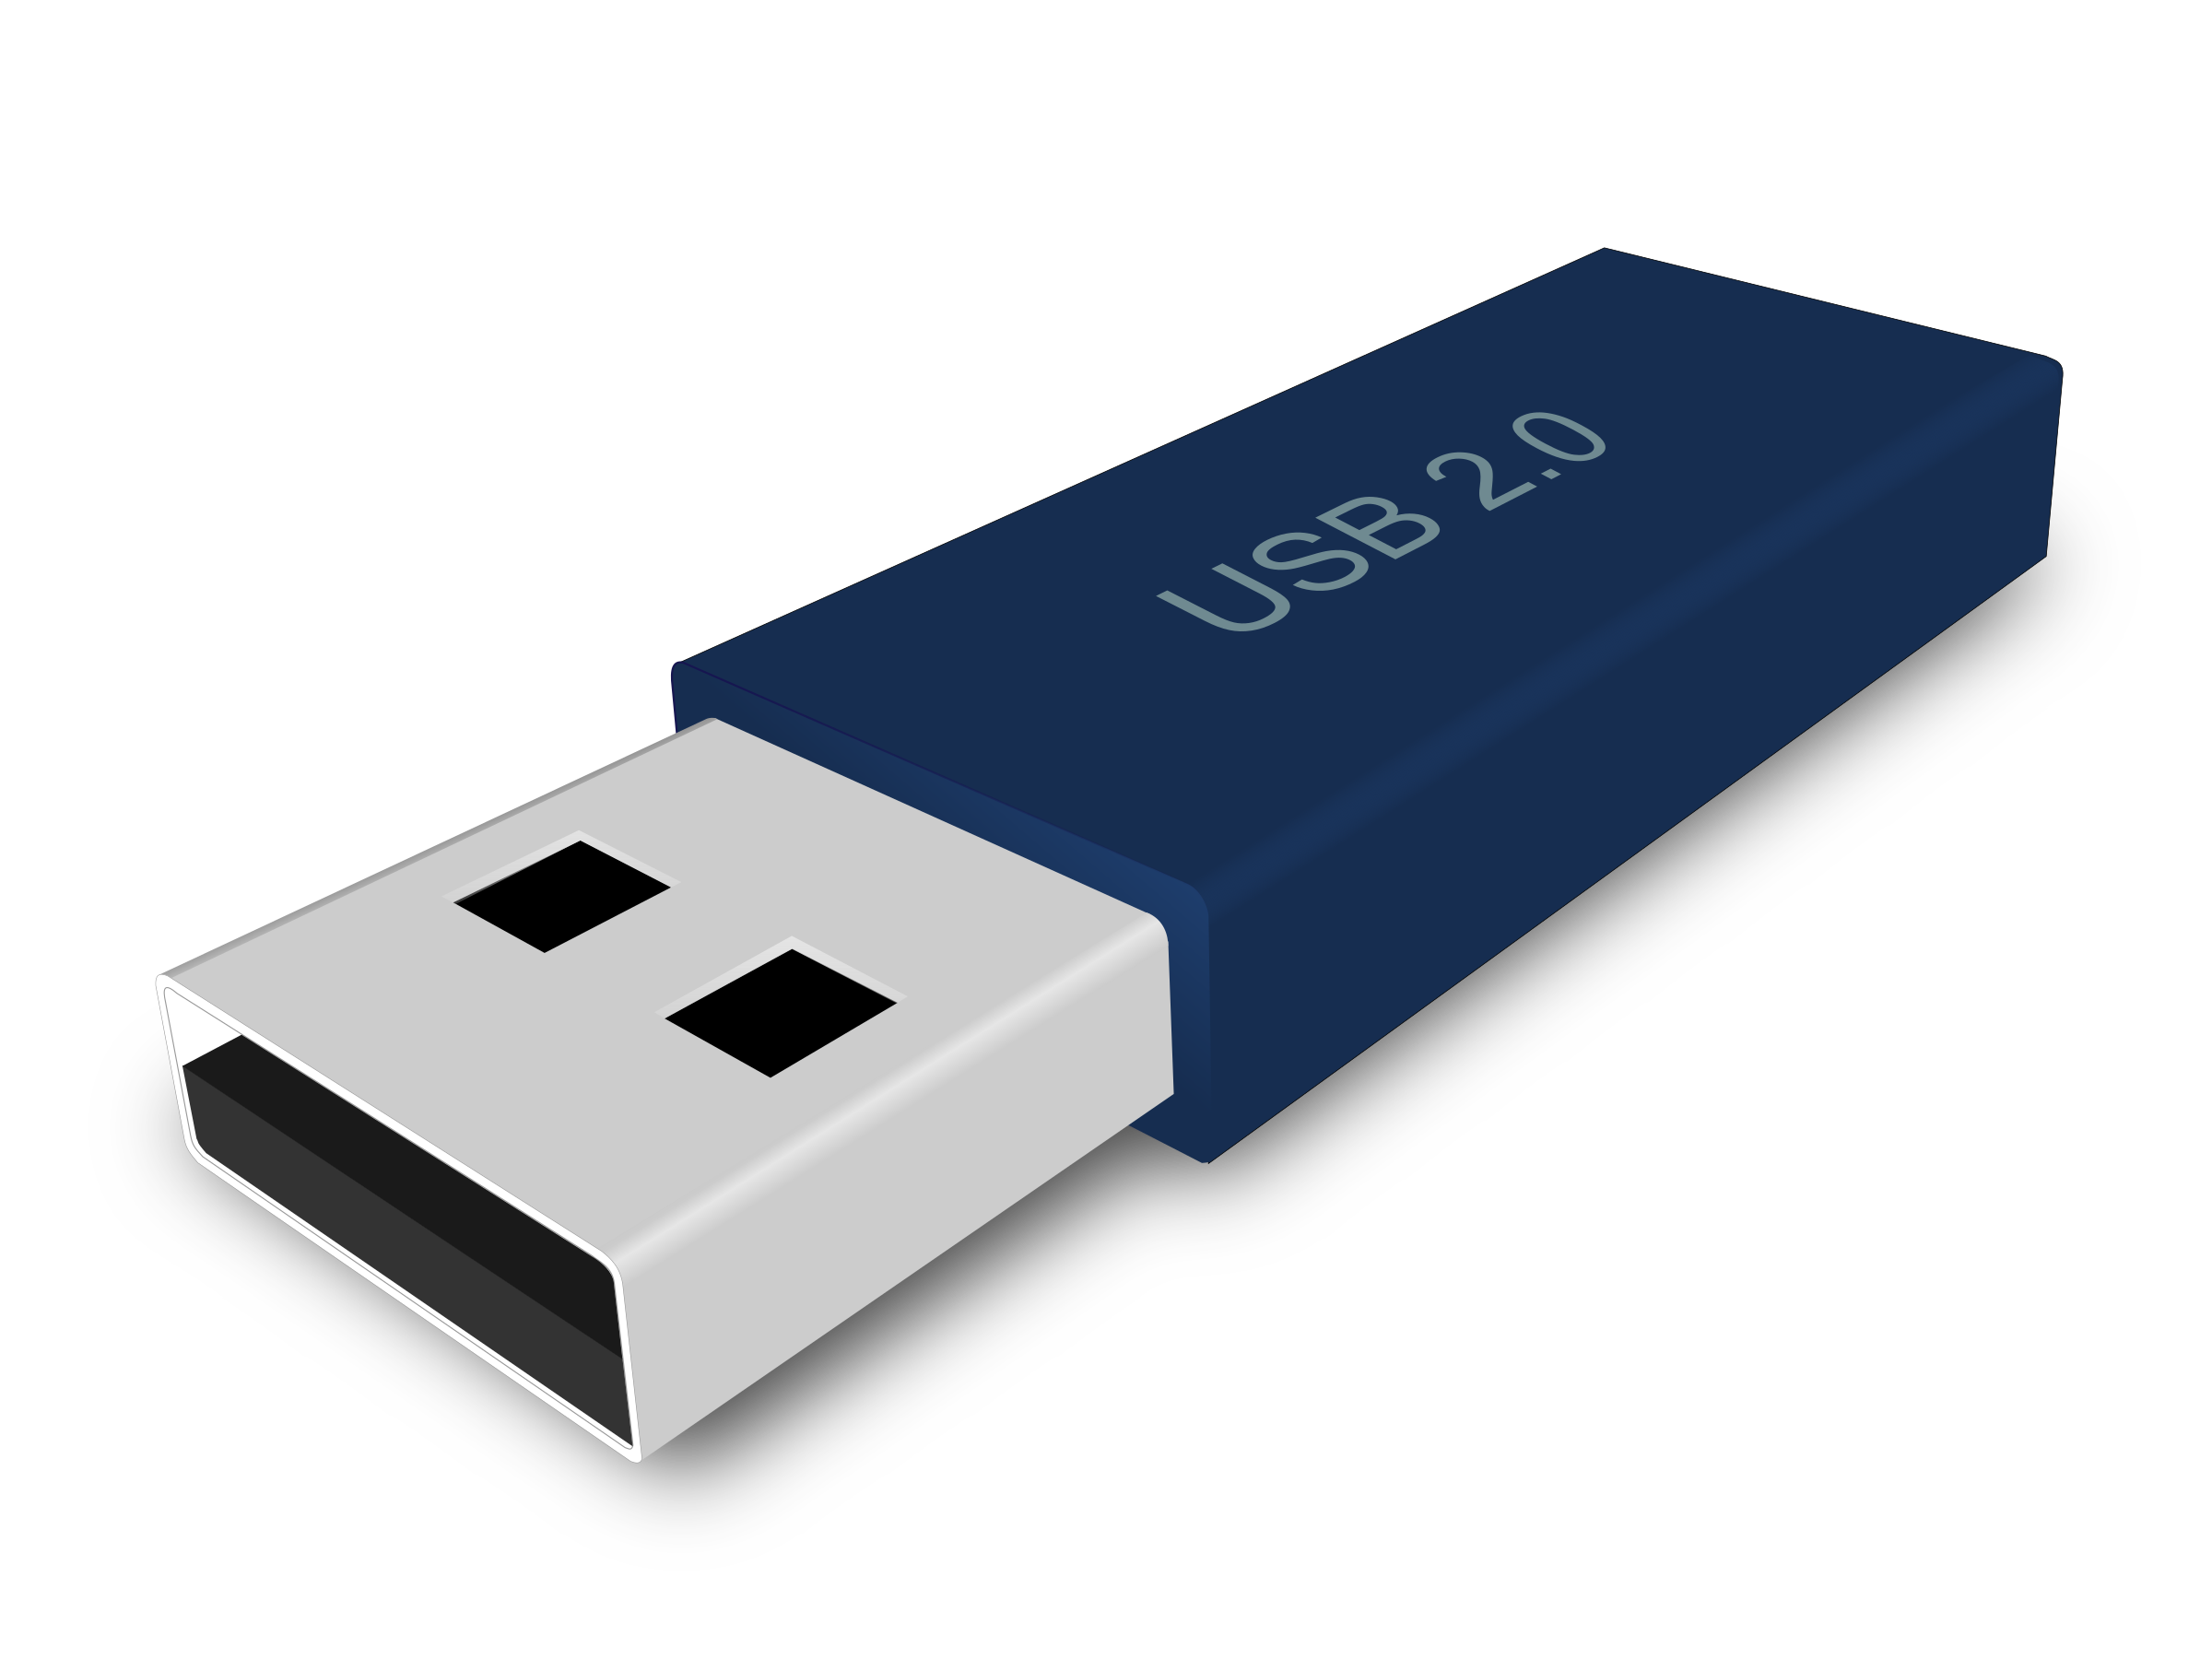 USB Firmware Update for Yamah